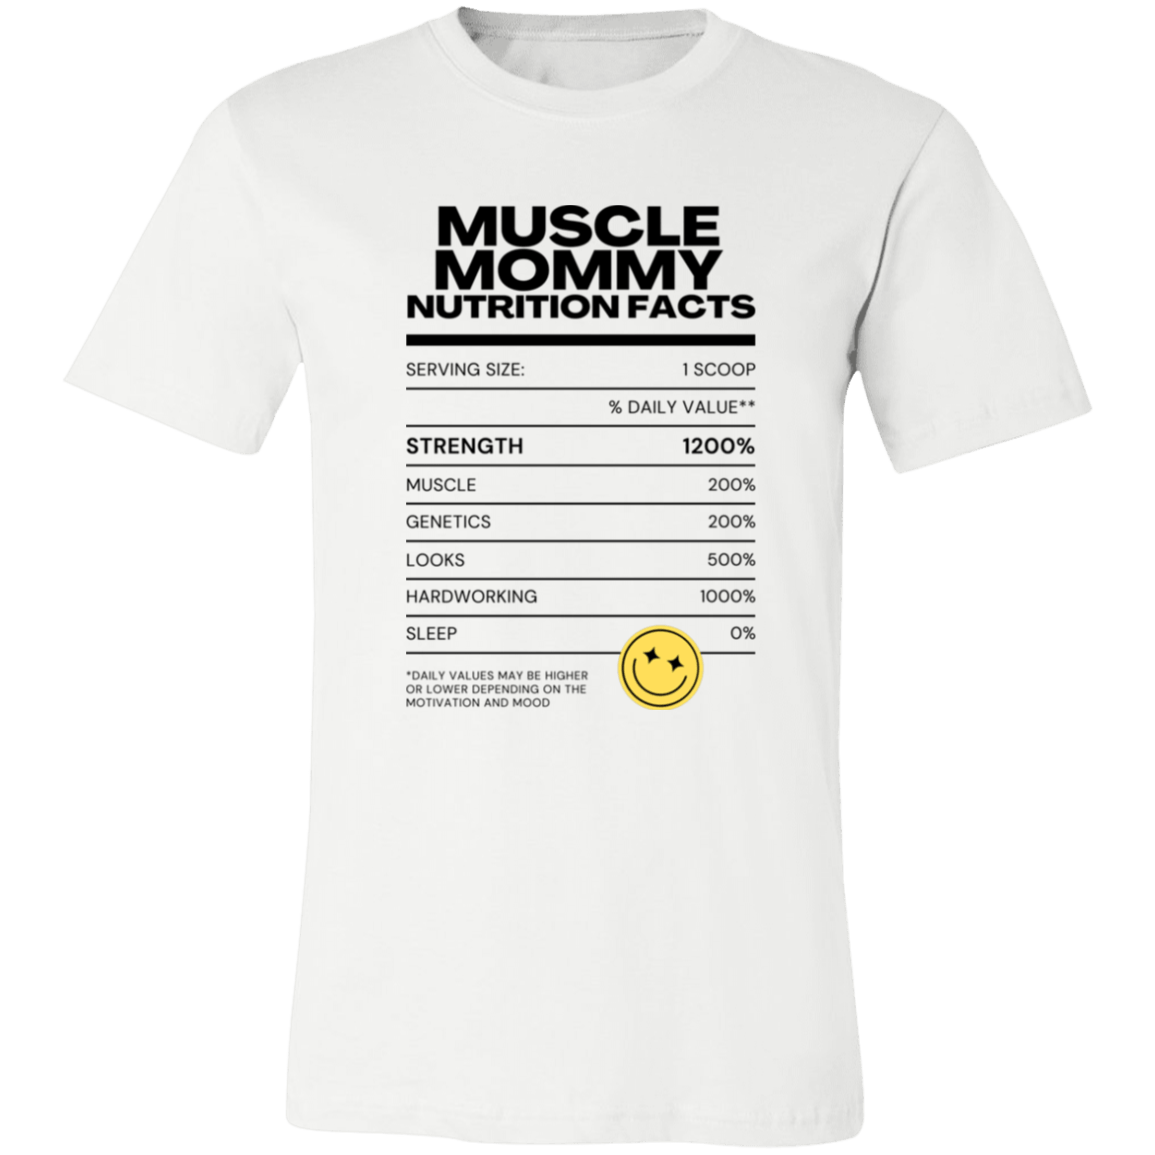 CustomCat T-Shirts White / X-Small Allrj Muscle mommy ingredients shirt